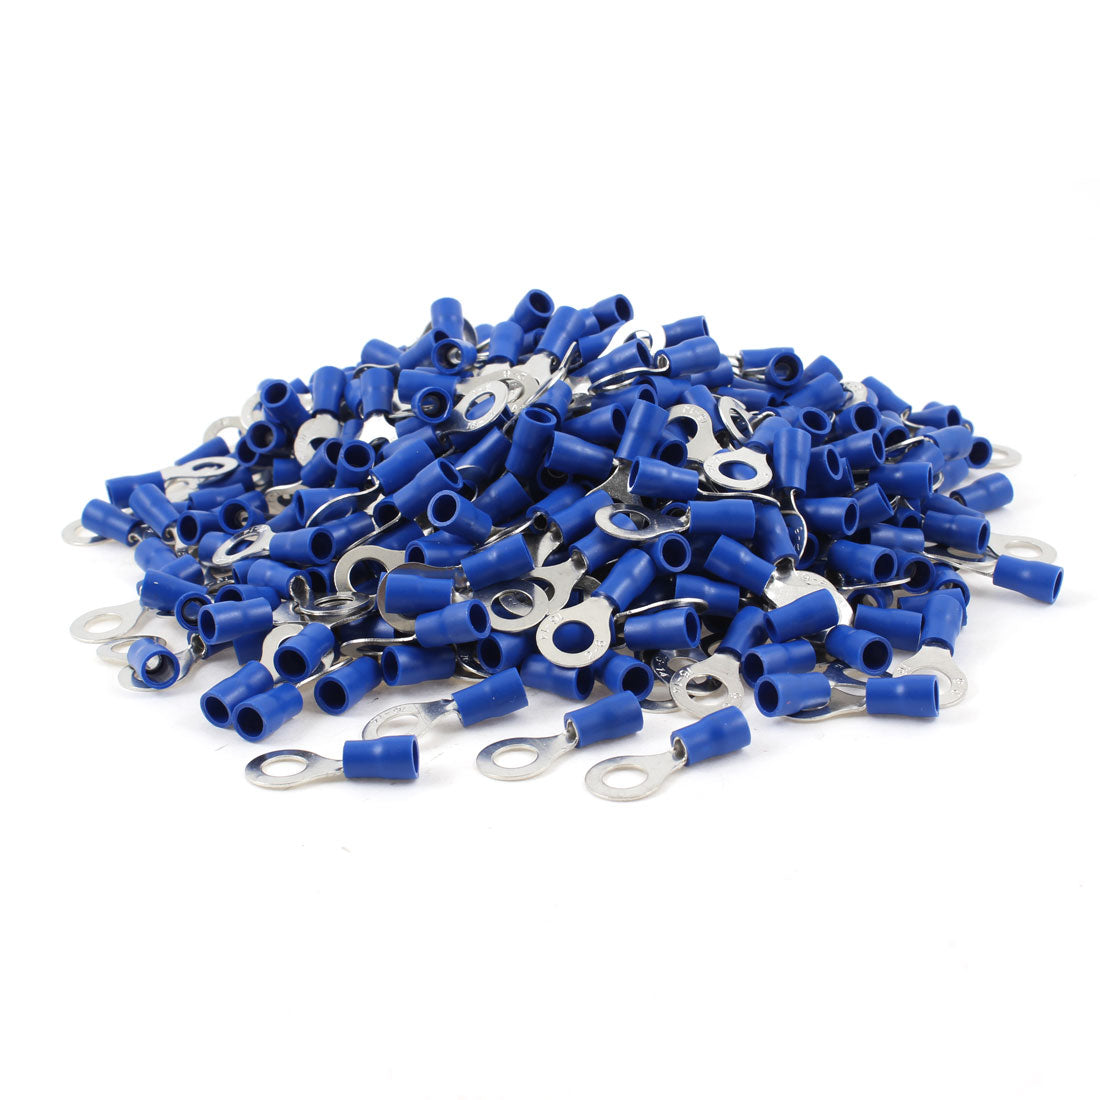 uxcell Uxcell 1000pcs RV2-6 Pre Insulated Ring Terminals Blue for 1/4" Stud AWG 16-14 Wire